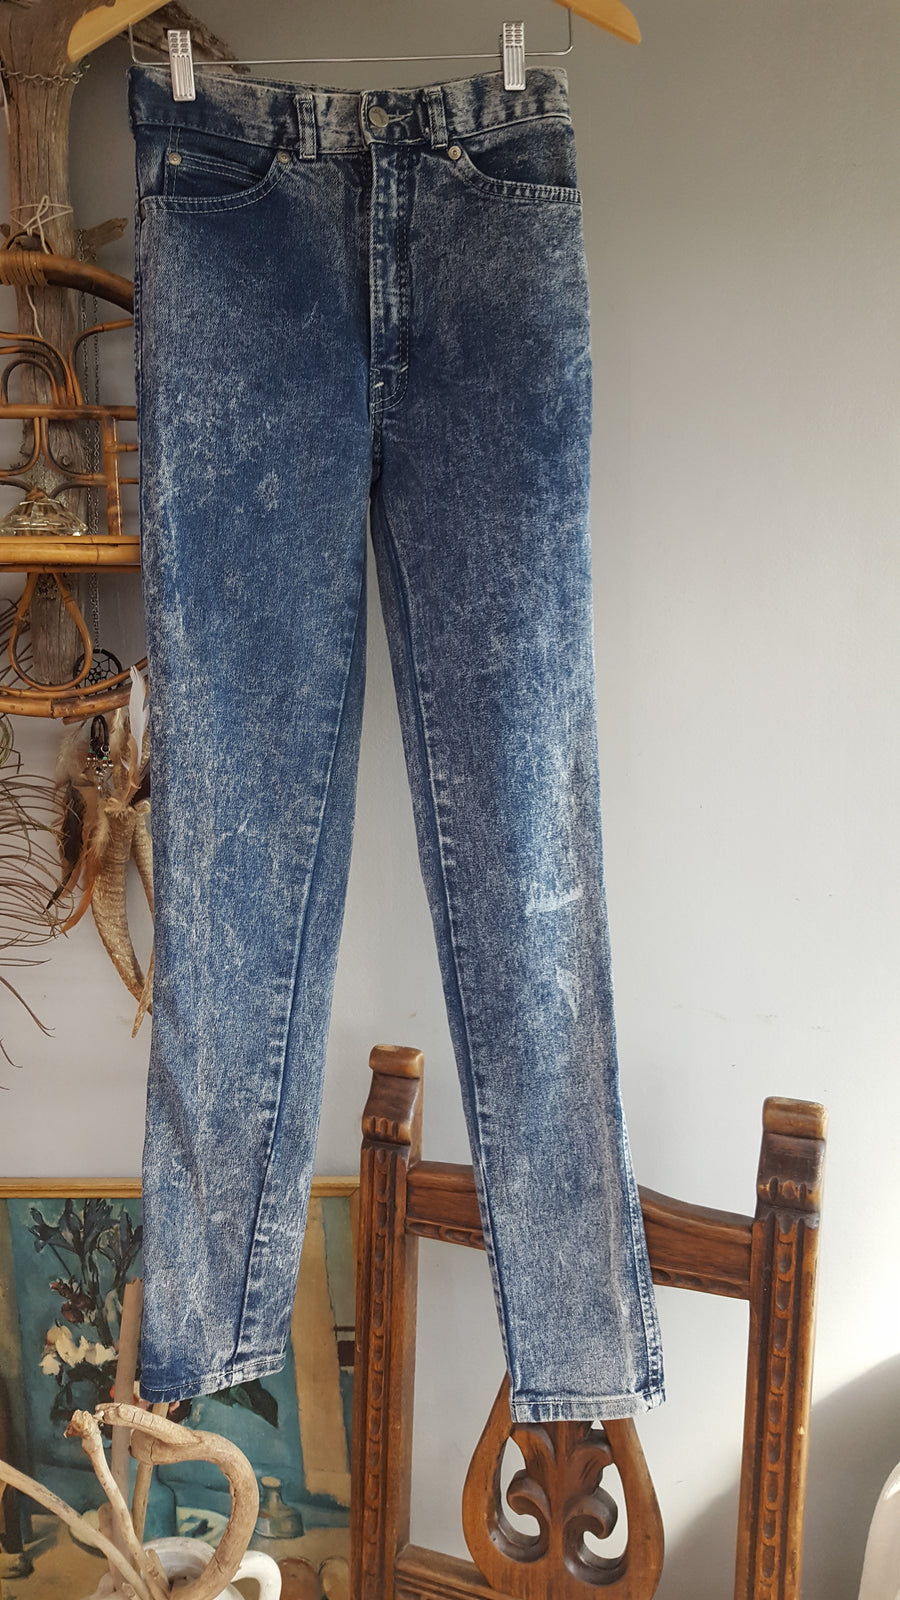 VINTAGE 80S HIGH WAISTED JEANS size 9 - Devils the Angel